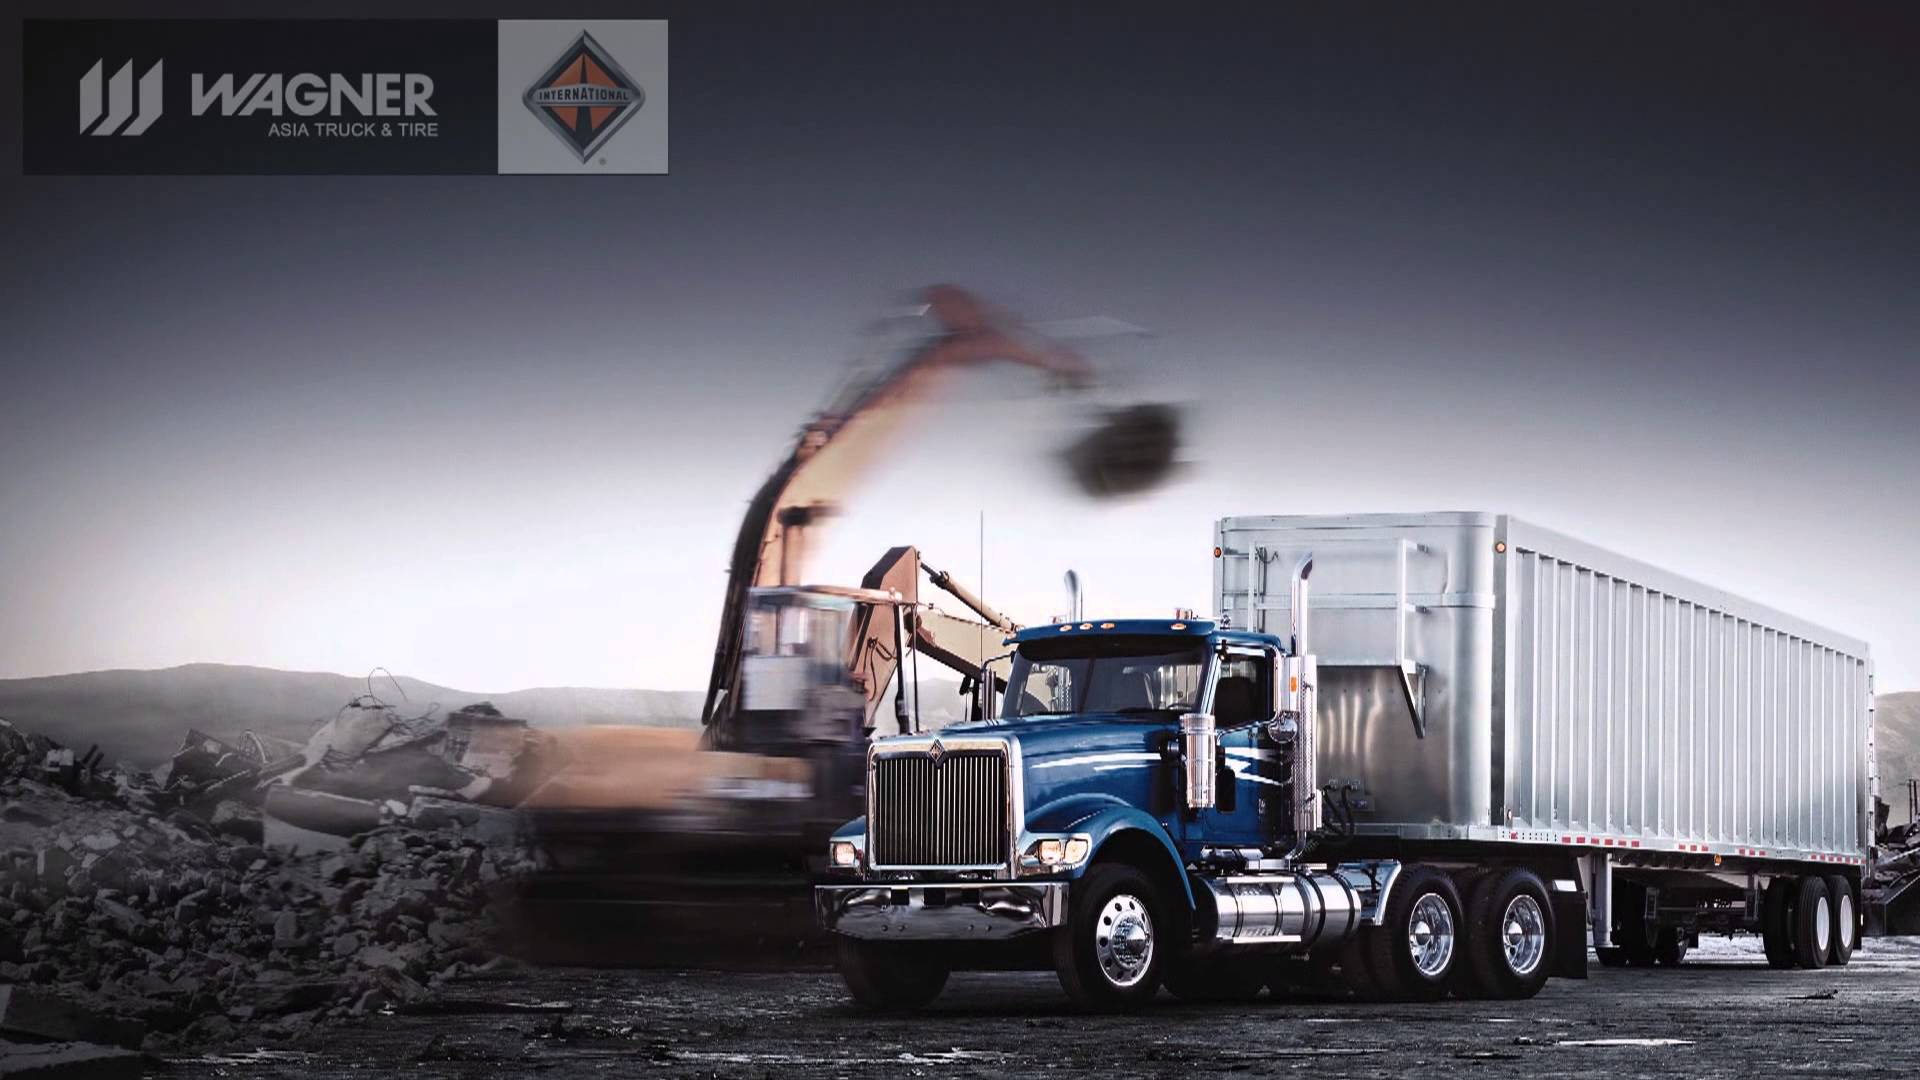 Wagner Asia Truck & Tire Company Introduction - YouTube